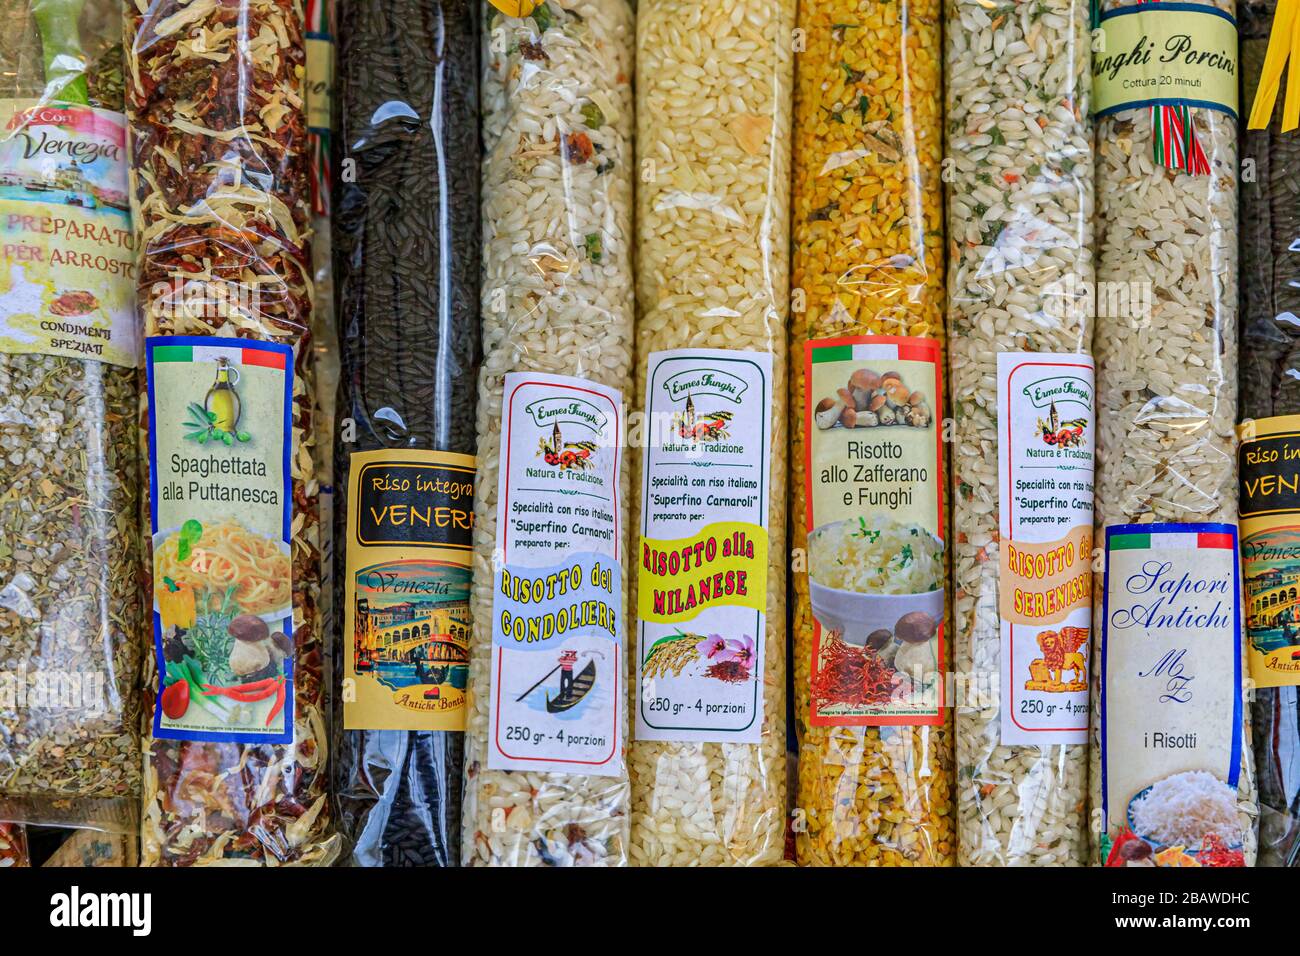 Venice, Italy - September 24, 2017: Food souvenir selection of prepackaged bags of rice for risotto with different flavors at a venetian market Stock Photo